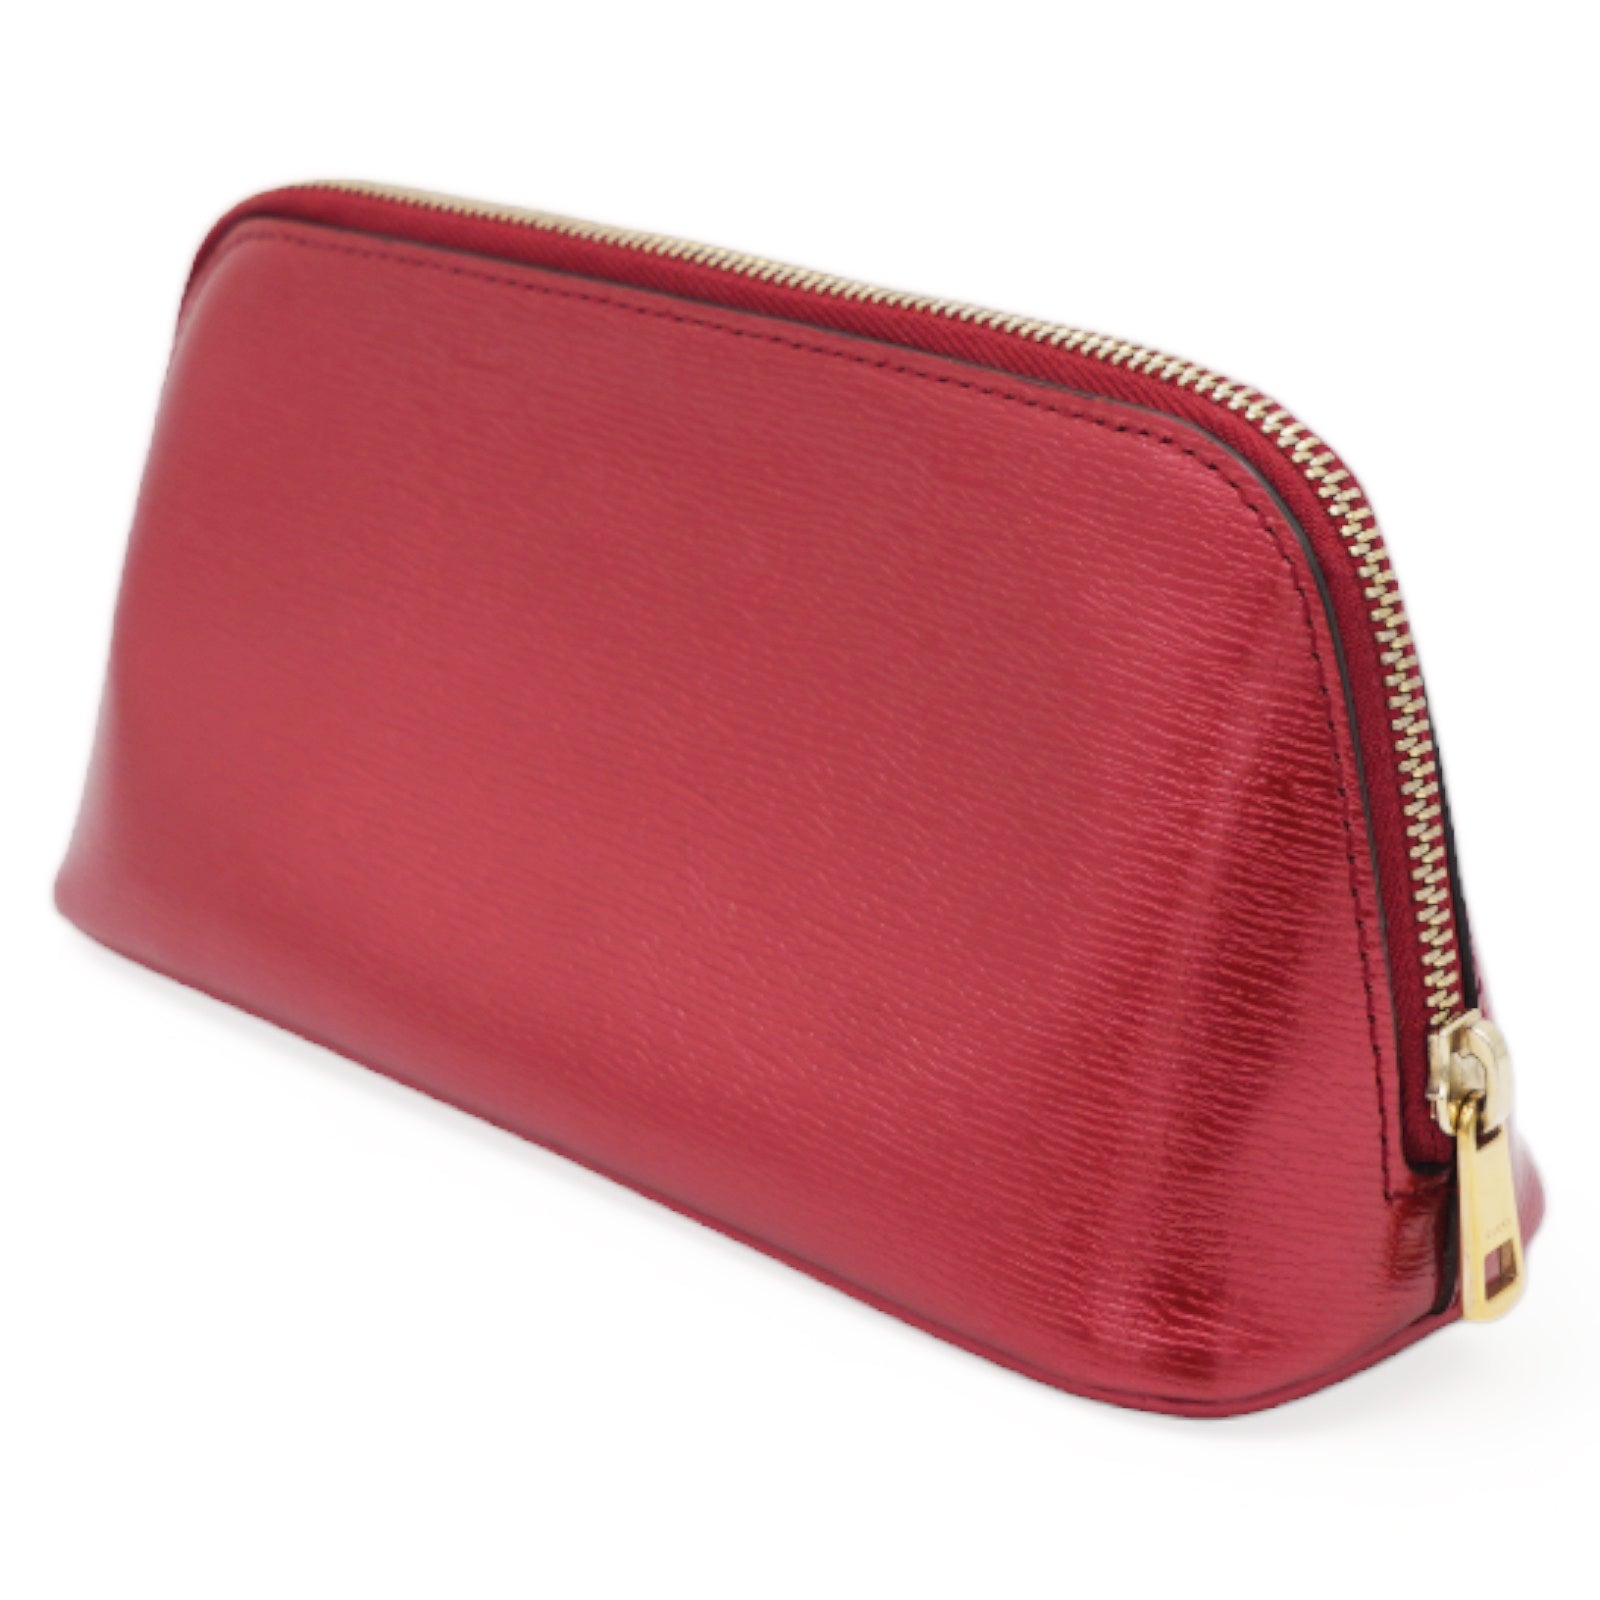 Leather Travel Bag Red